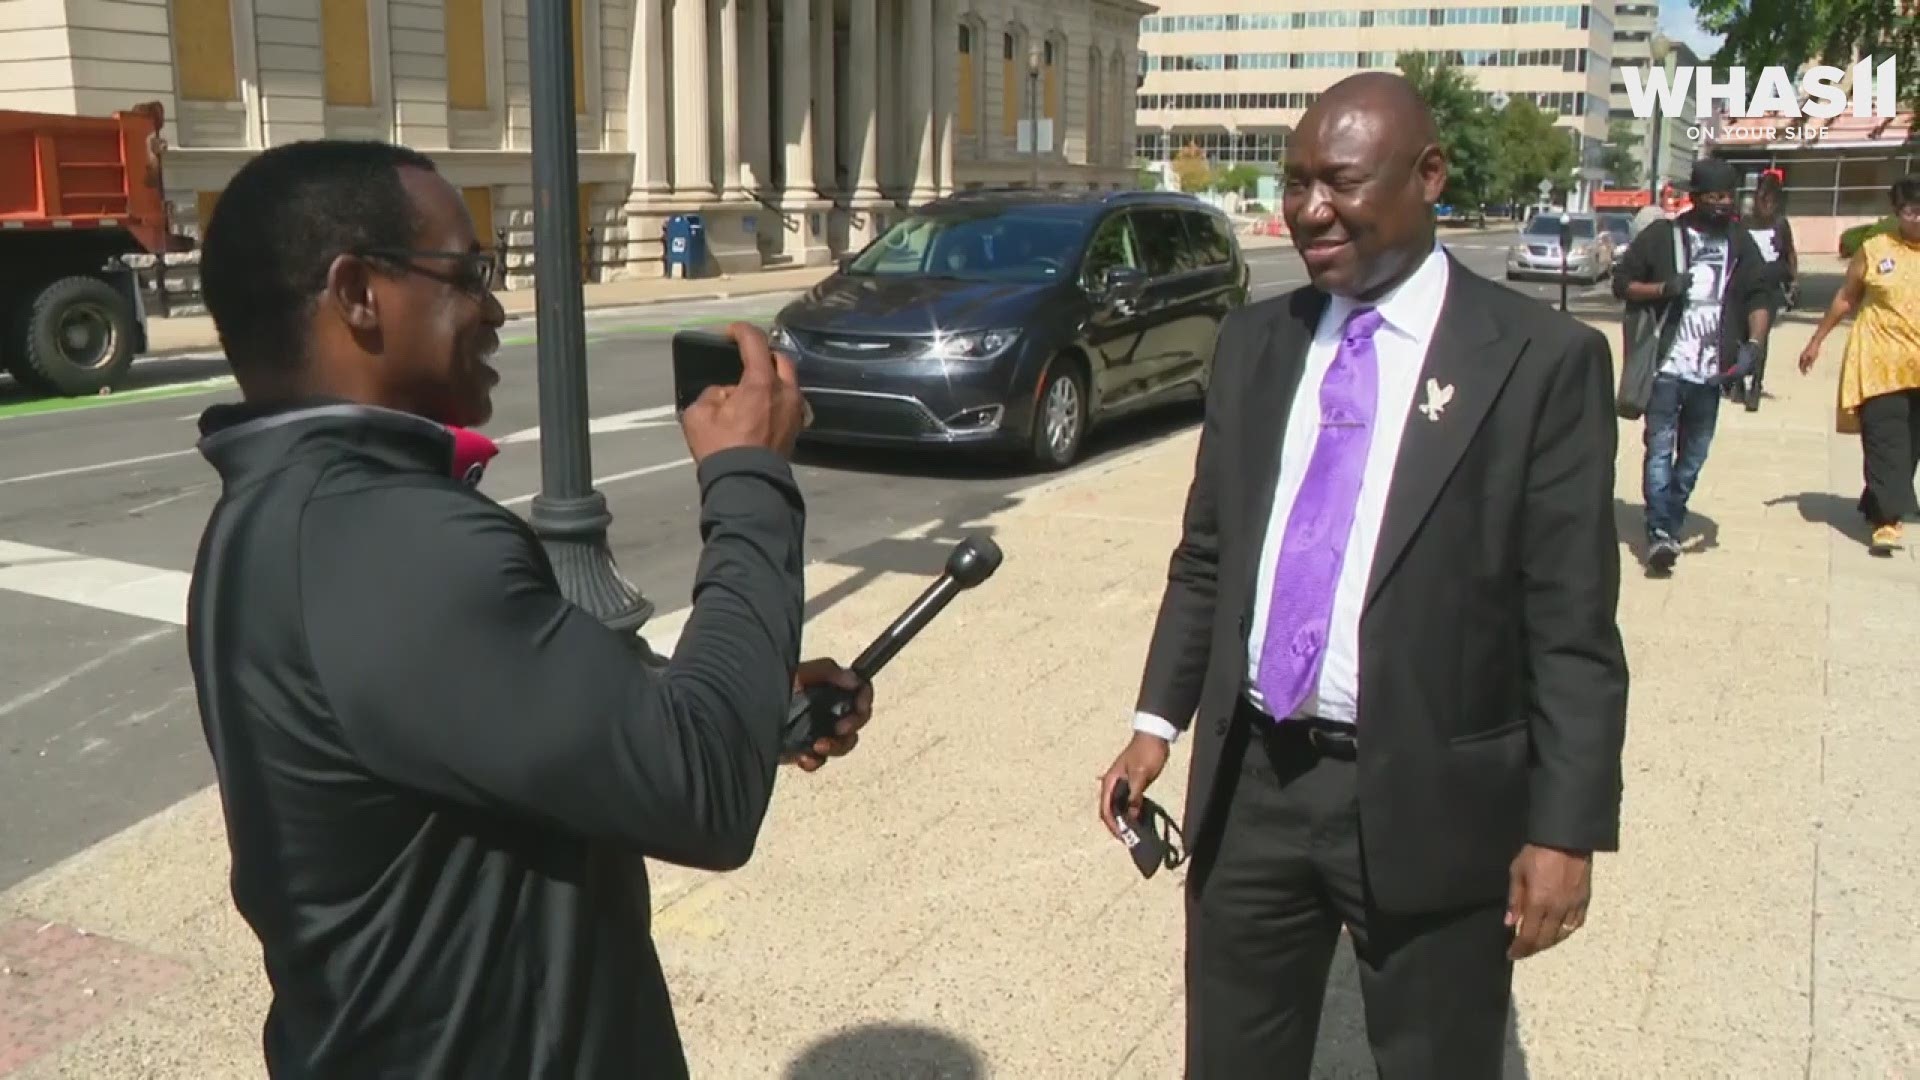 WTHR's Steve Jefferson interviews Civil Rights attorney and one of the attorneys representing Breonna Taylor's family, Ben Crump following a news conference.